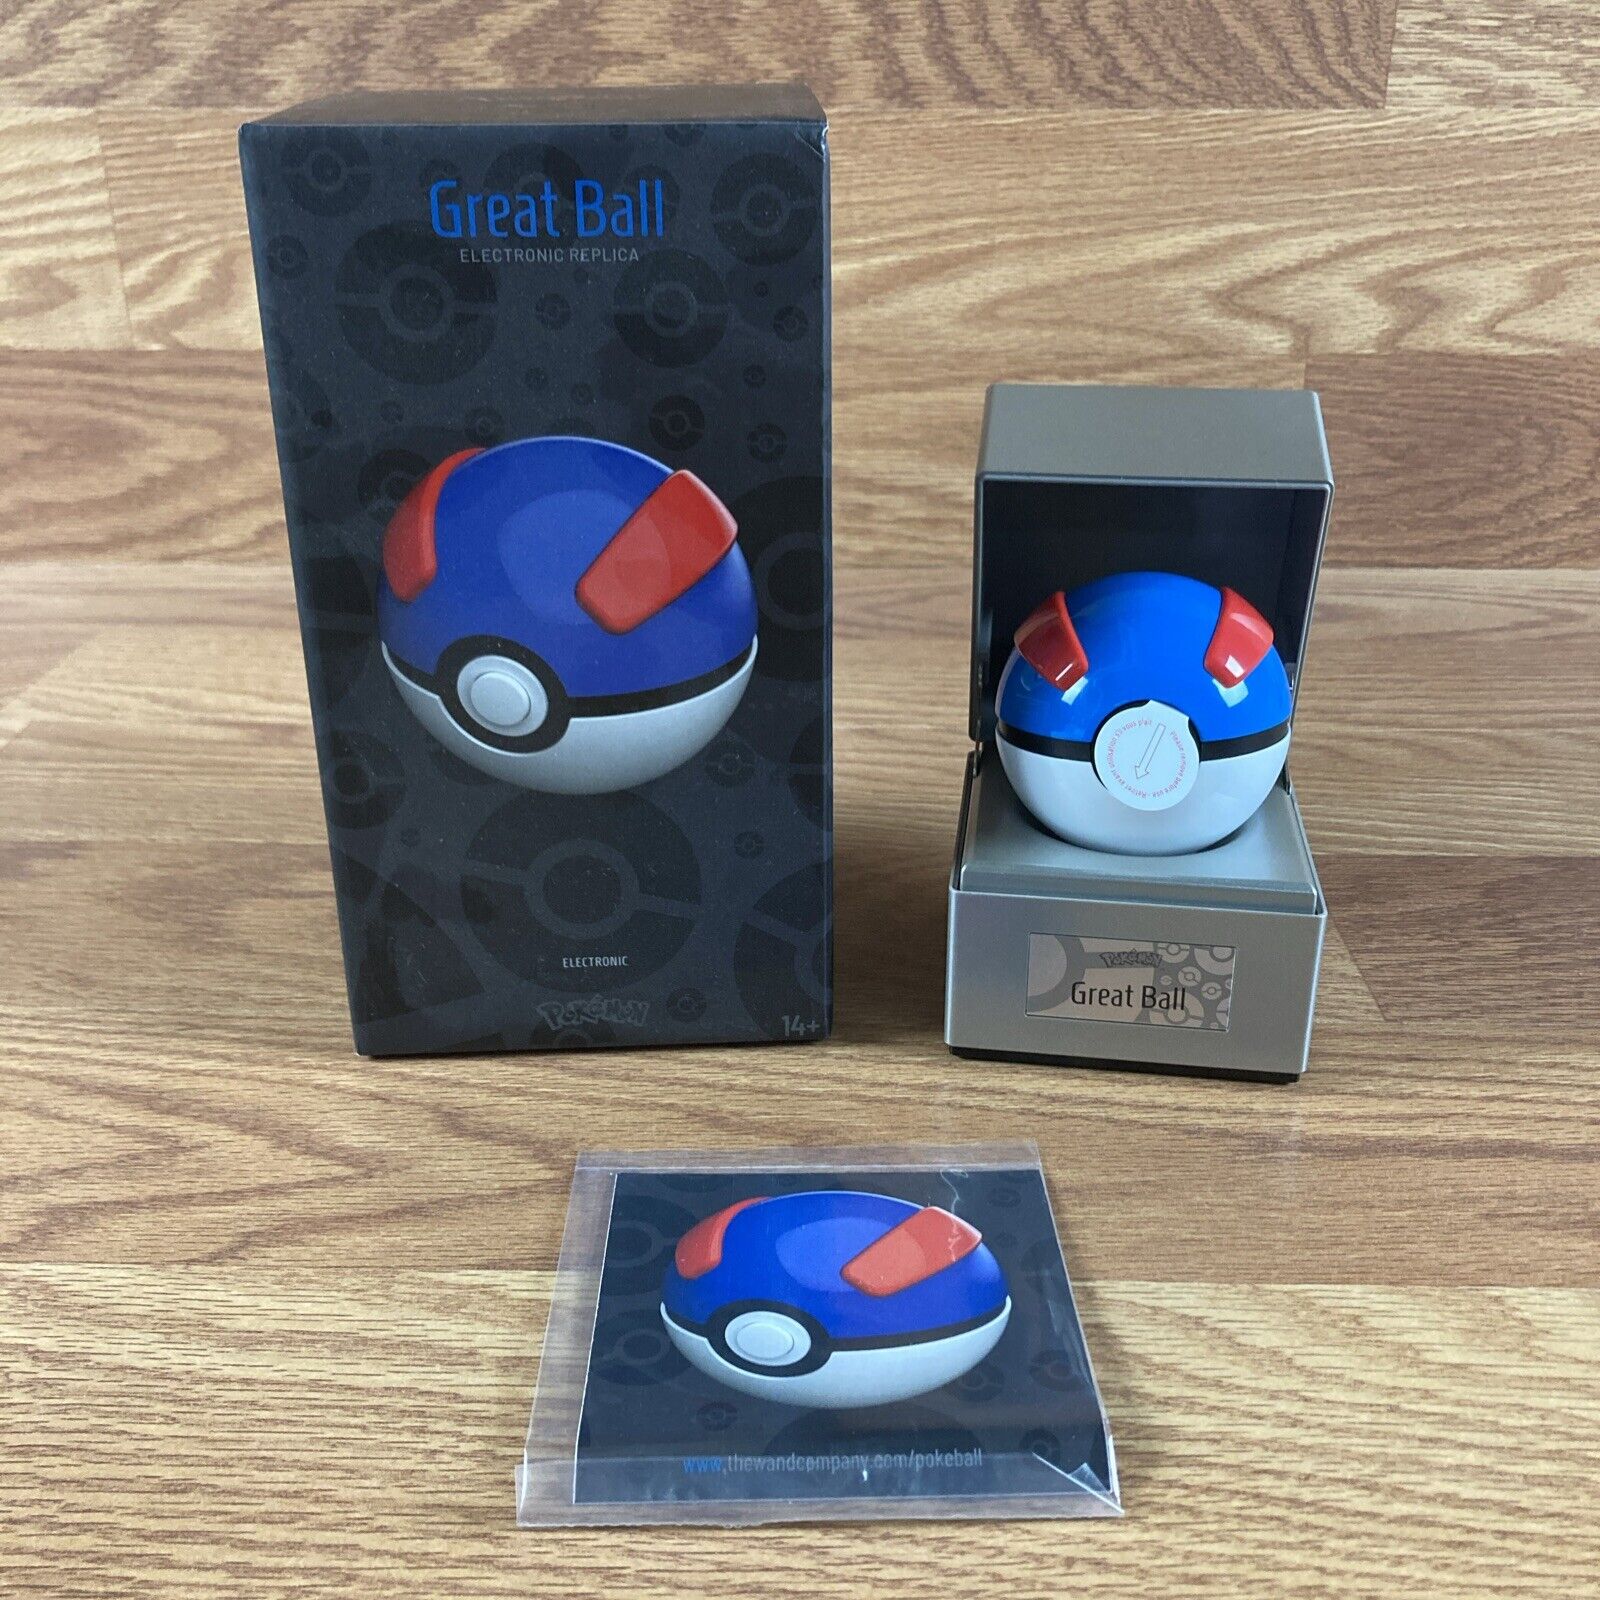 Pokemon Great Ball Die-Cast Replica by The Wand Company - New Open Box